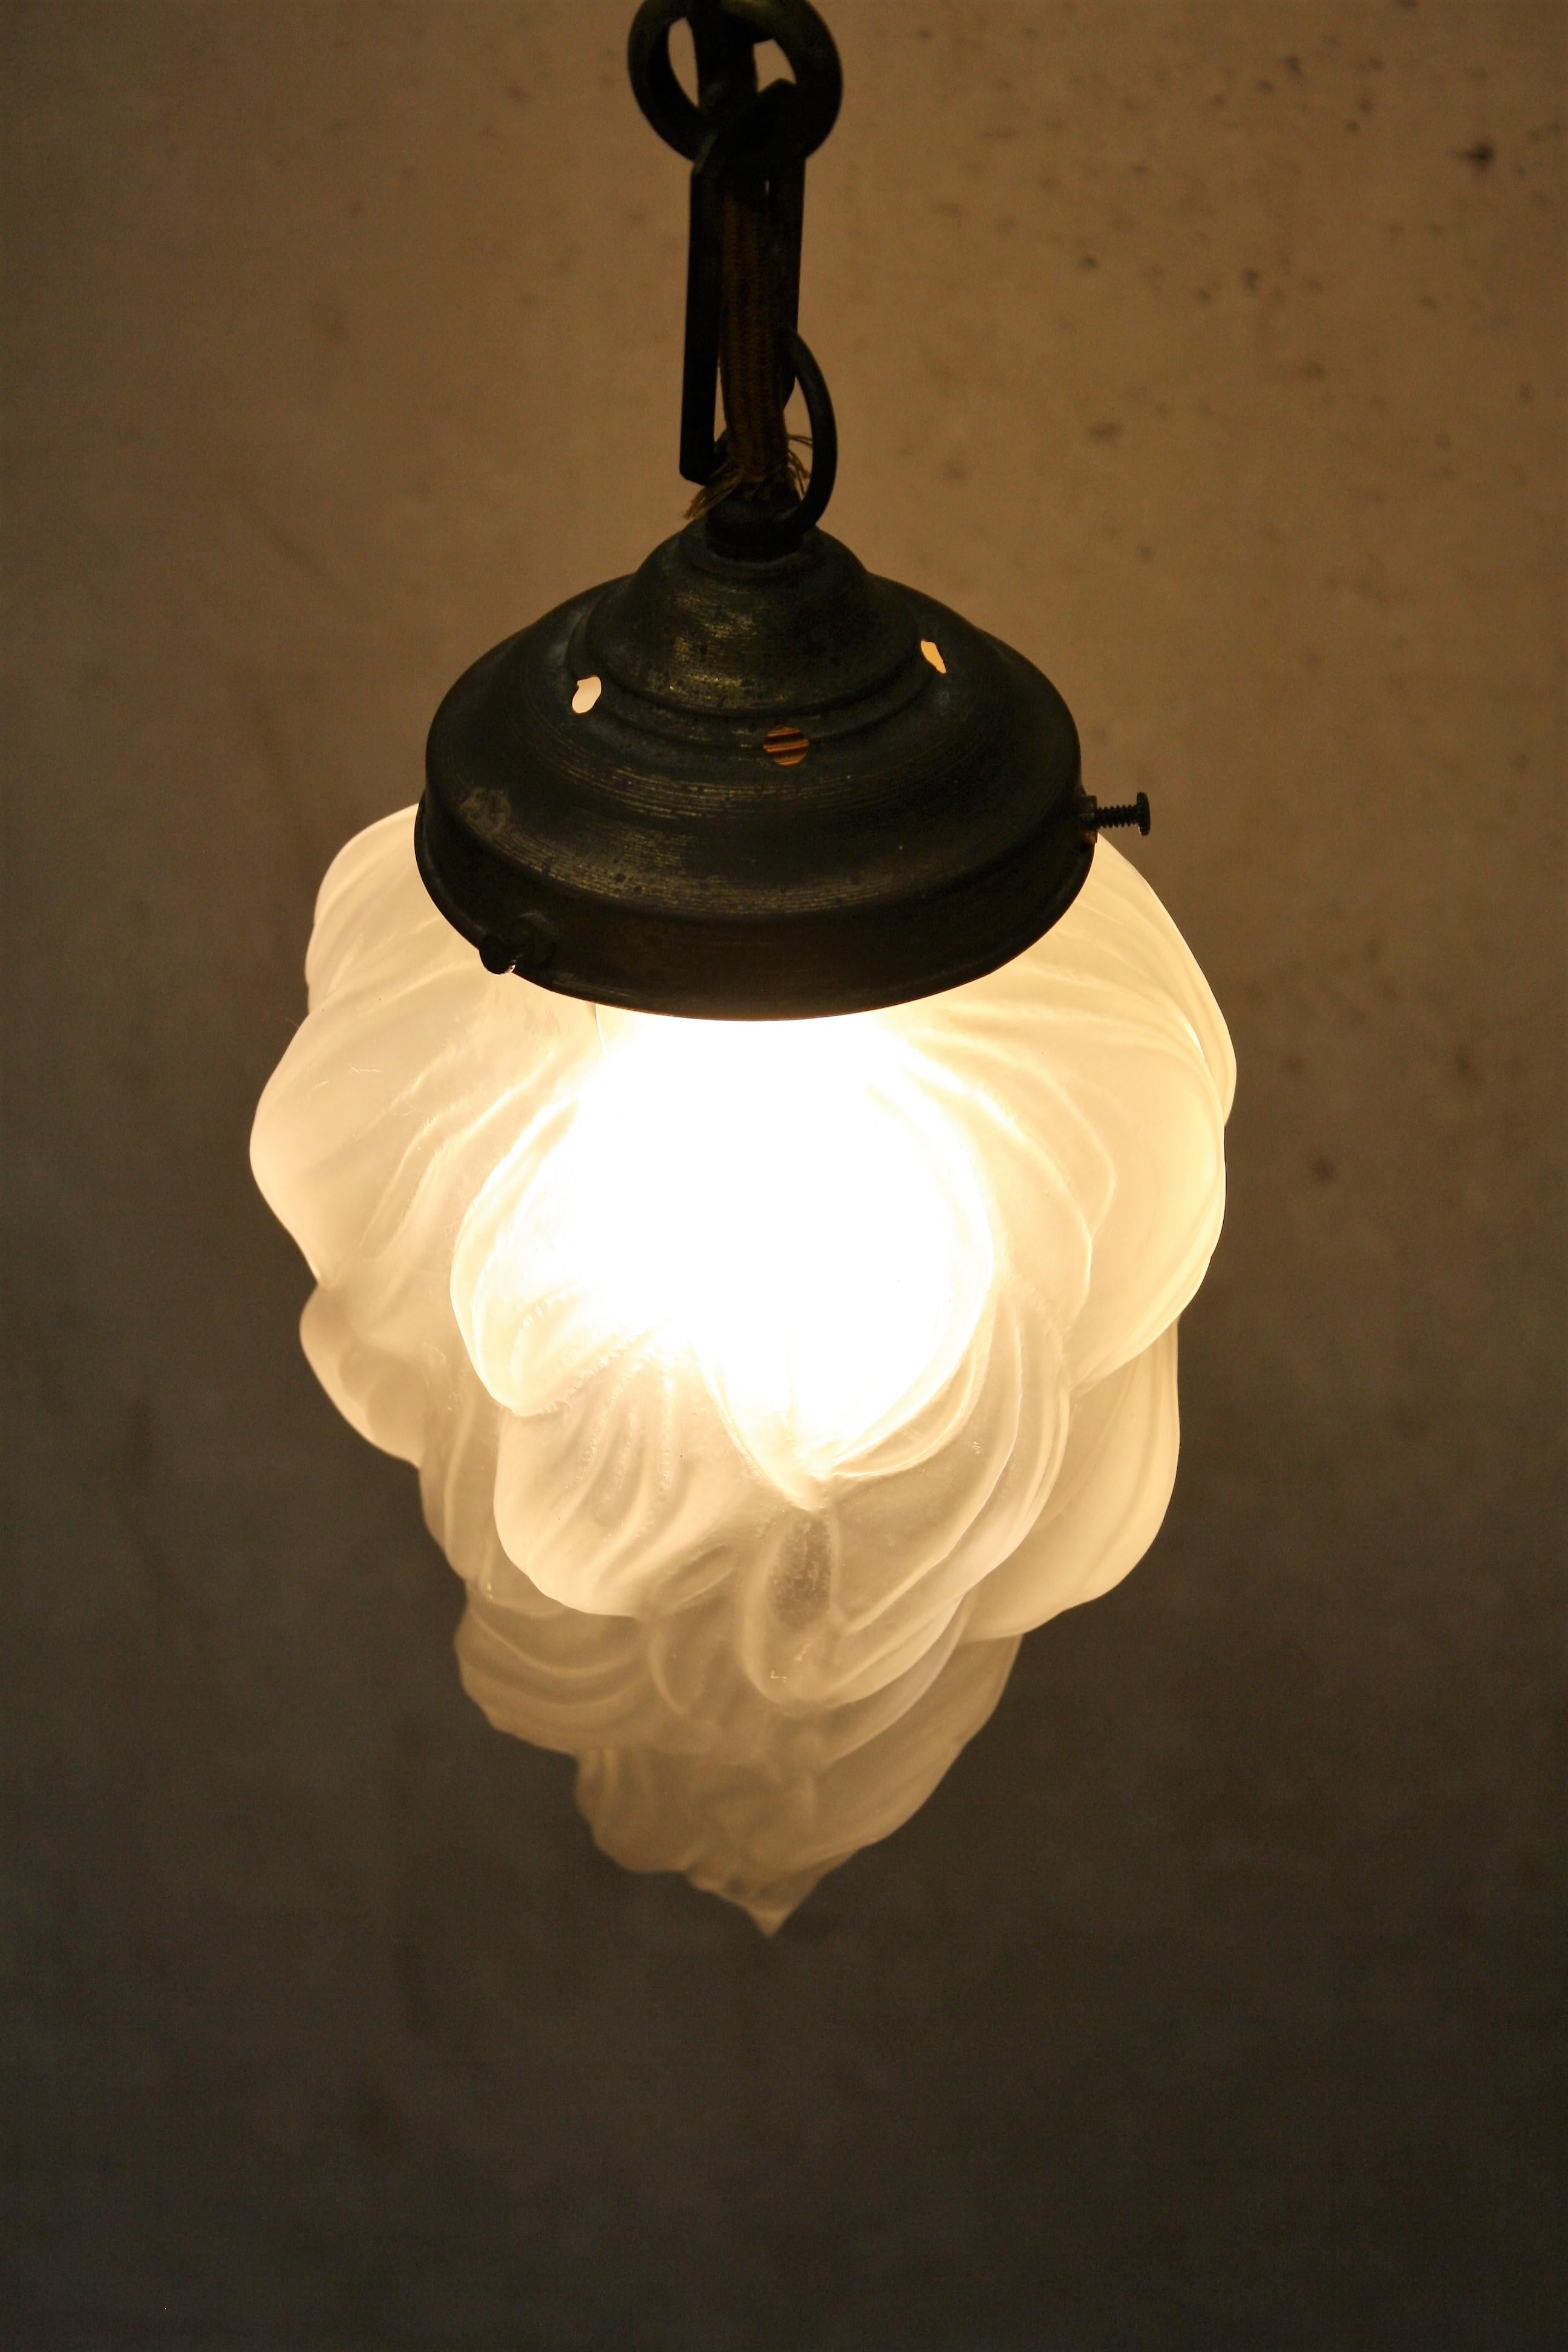 Charming Art Deco hallway light made of frosted glass.

Flame shaped shade. 

The lamp emits a warm light.

Original copper shade holder. 

Tested and ready for use.

1930s, France. 

Dimensions: 
H: 75 cm/ 29.5